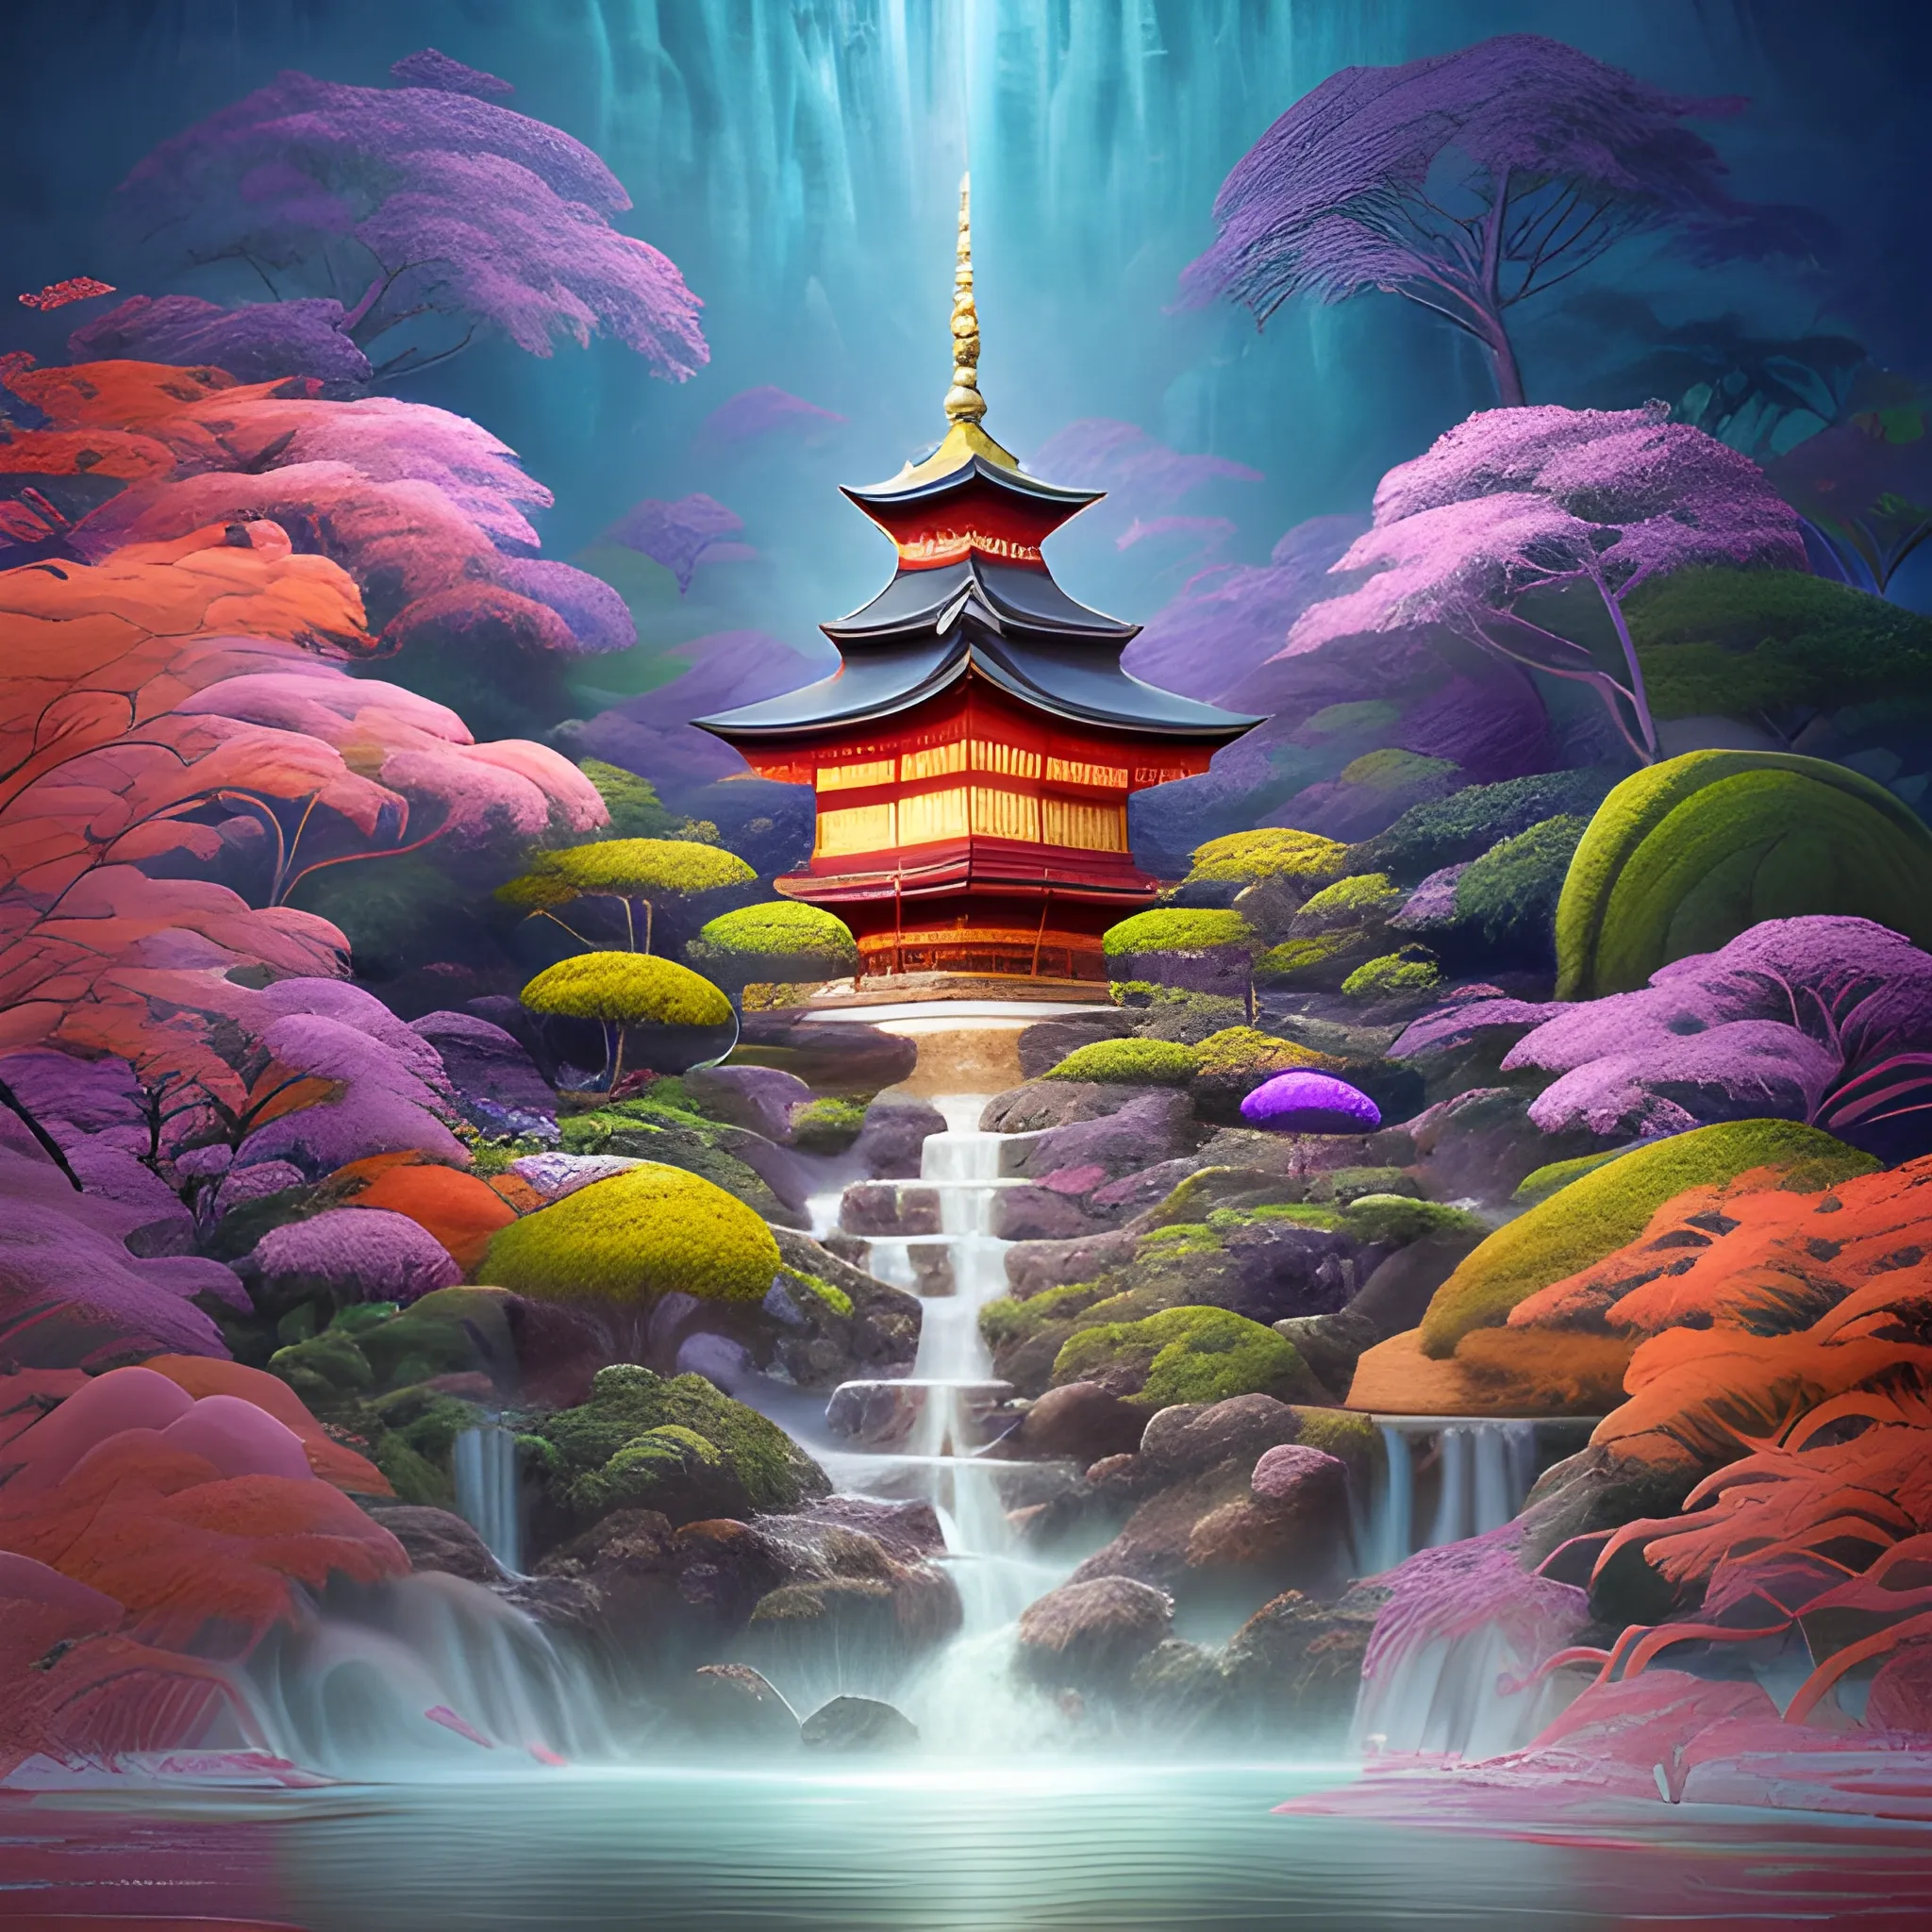 (by Ananta Mandal (and Andrew Biraj:0.5)), (in the style of nihonga), Style: Abstract, Medium: Digital illustration, Subject: A Sanskrit Avalokiteśvara in the middle of picture, An otherworldly landscape with floating islands, cascading waterfalls, and vibrant flora and fauna. Camera Angle: Overhead shot capturing the vastness and intricate details of the scene. The colors are saturated, and the lighting creates a warm and ethereal atmosphere. The painting is highly detailed, with every brushstroke capturing the complexity of the imaginary world., (high quality), (detailed), (masterpiece), (best quality), (highres), (extremely detailed), (8k)